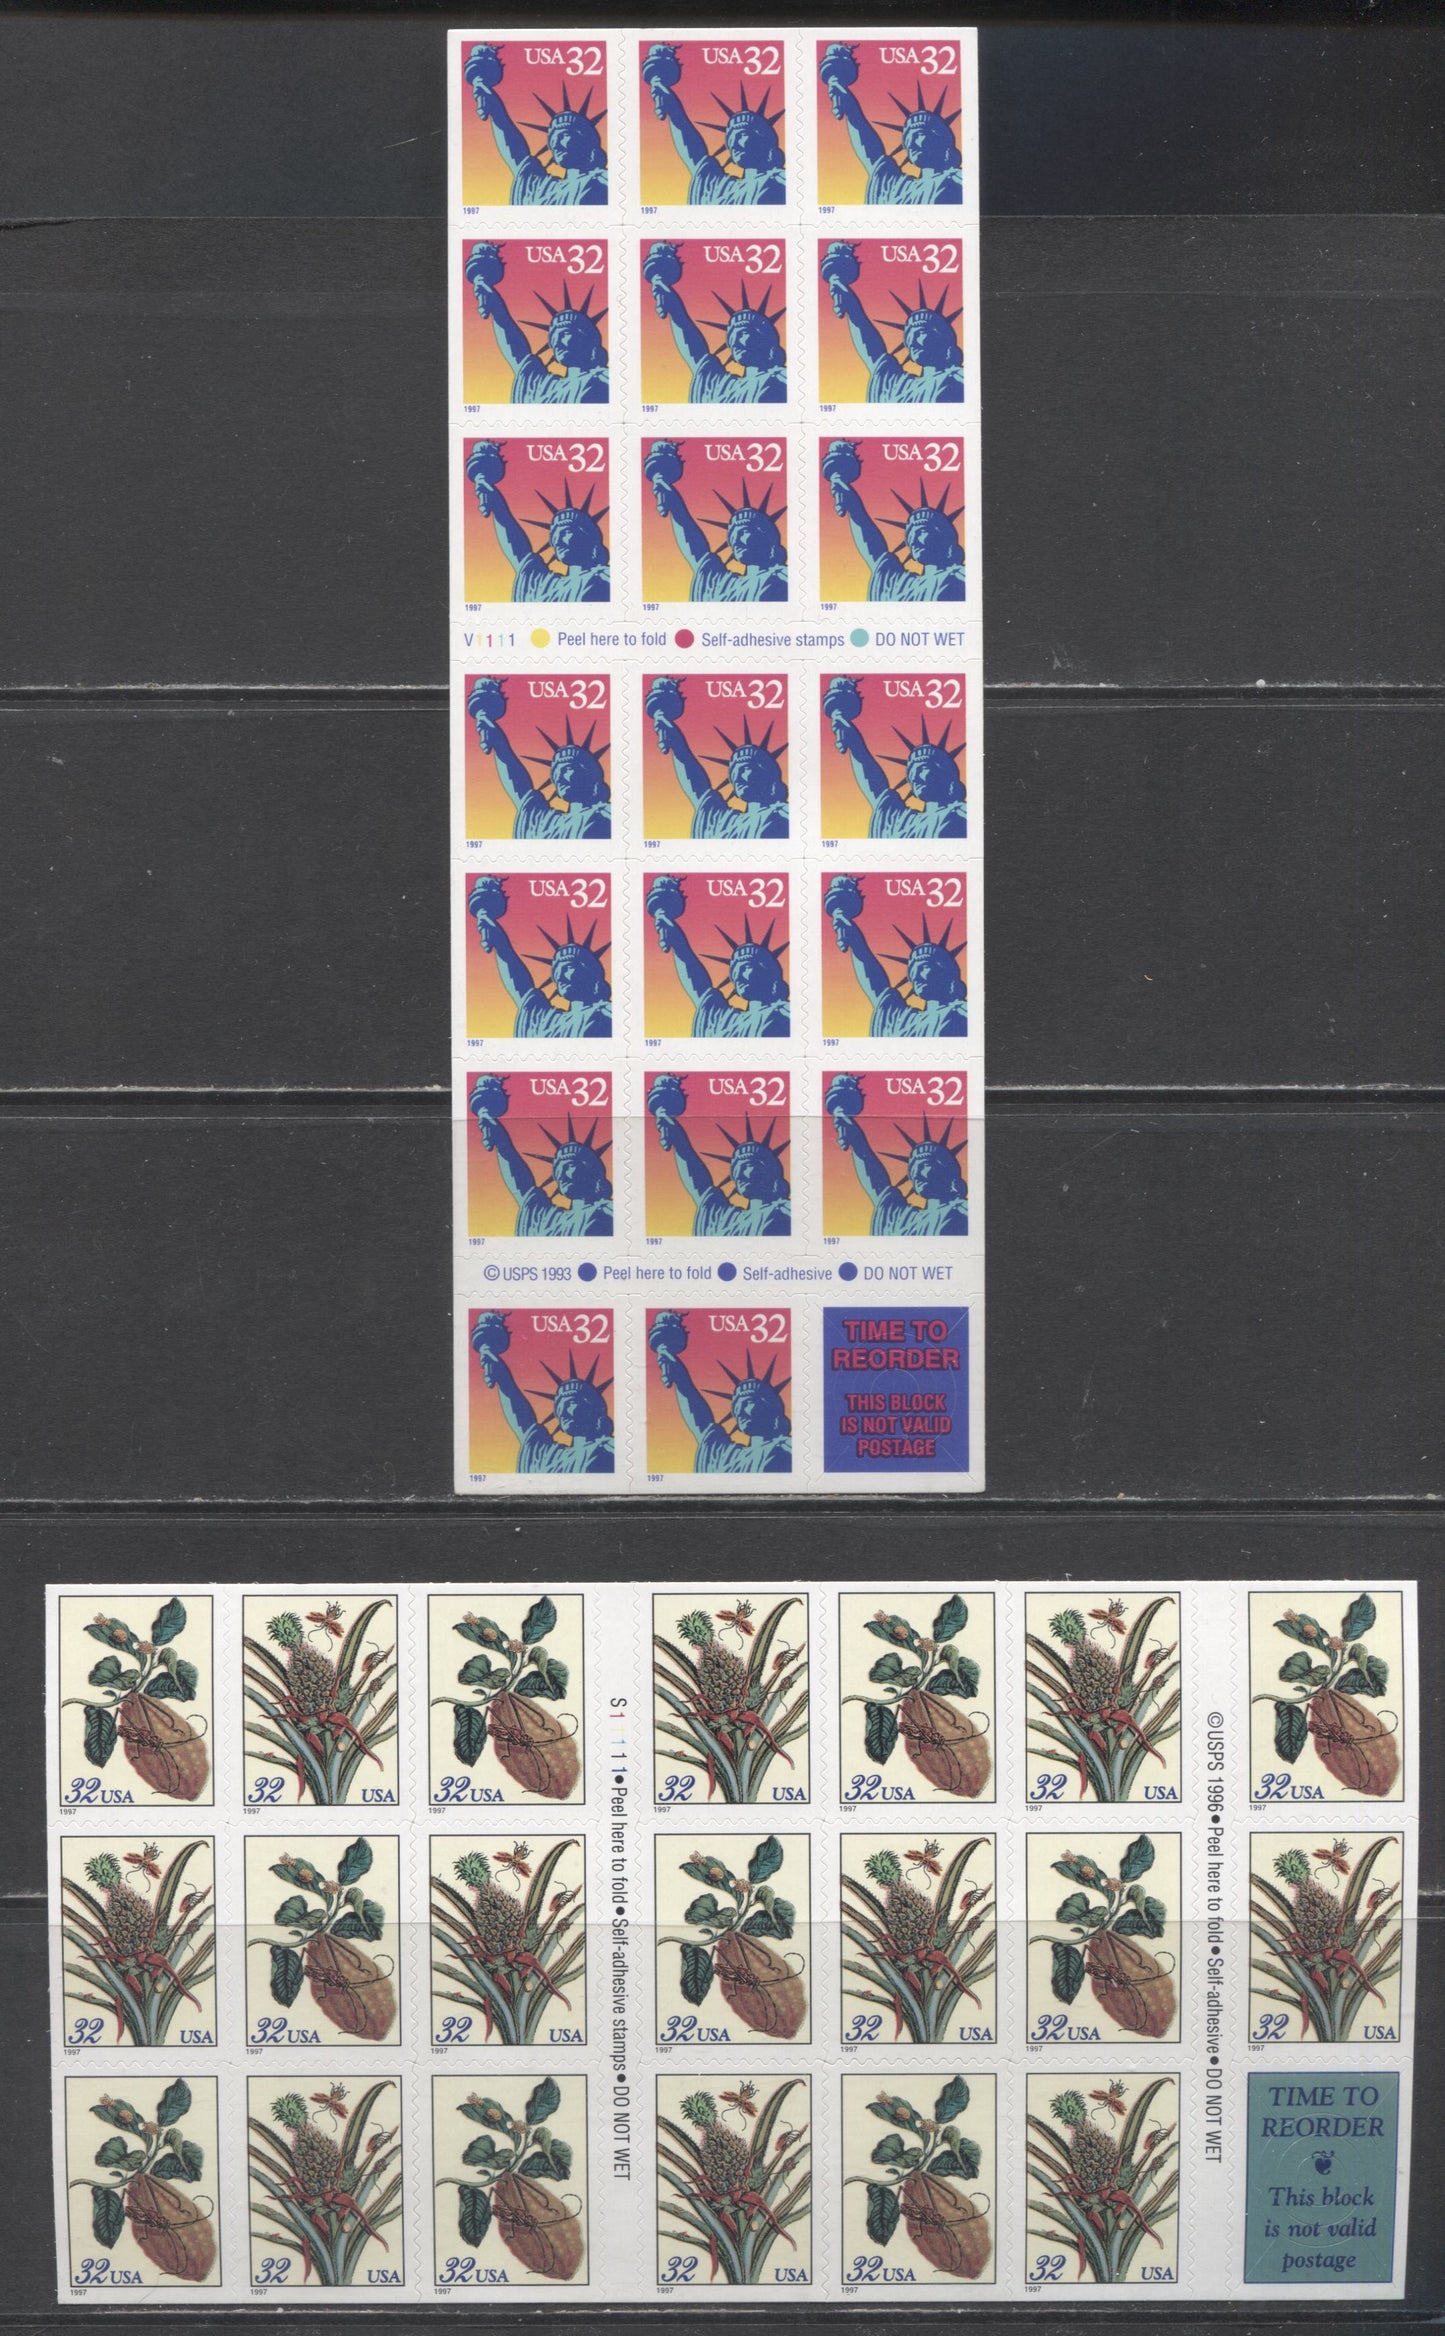 Lot 105 United States SC#2559a/3127a 1992-1997 Statue Of Liberty - Merian Botanical Prints Issues, 2 VFNH Blocks Of 18 & 20, Click on Listing to See ALL Pictures, 2017 Scott Cat. $24